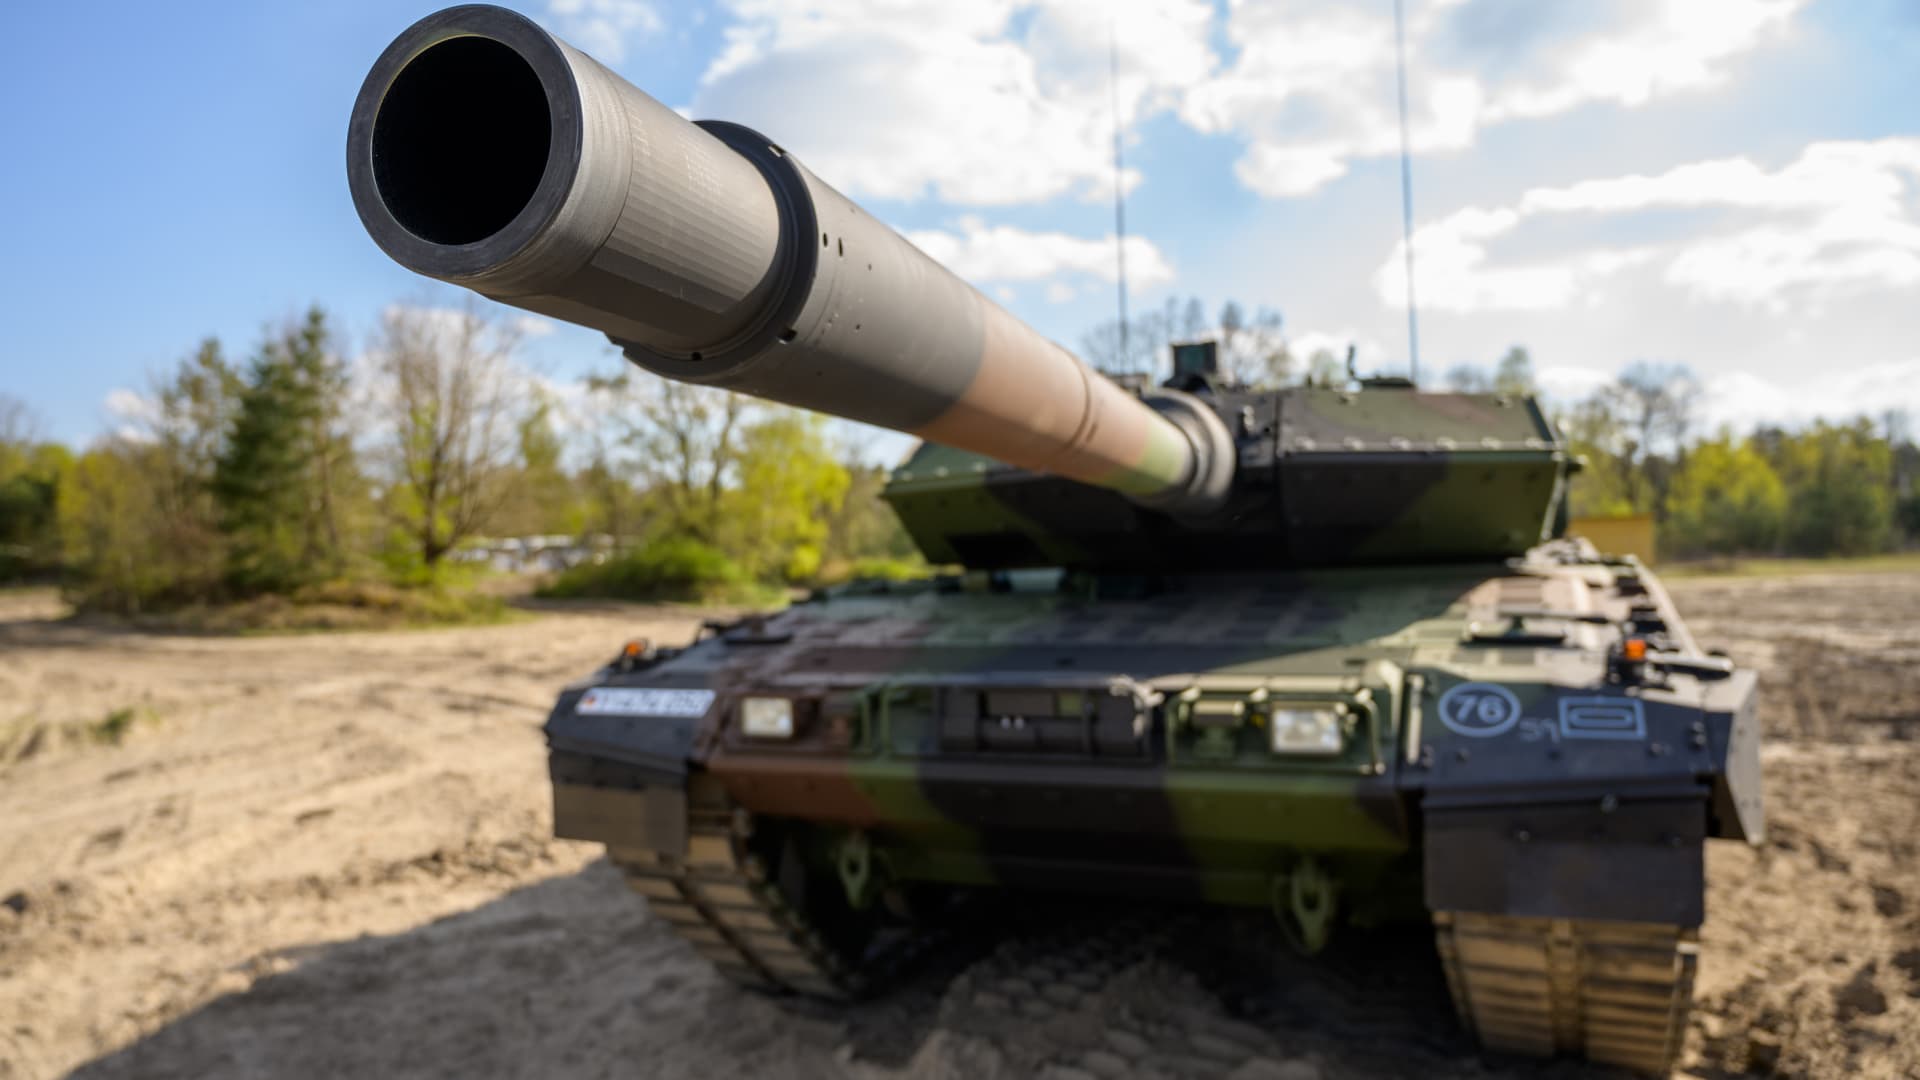 Germany announces it will send 14 of its Leopard 2 battle tanks to Ukraine